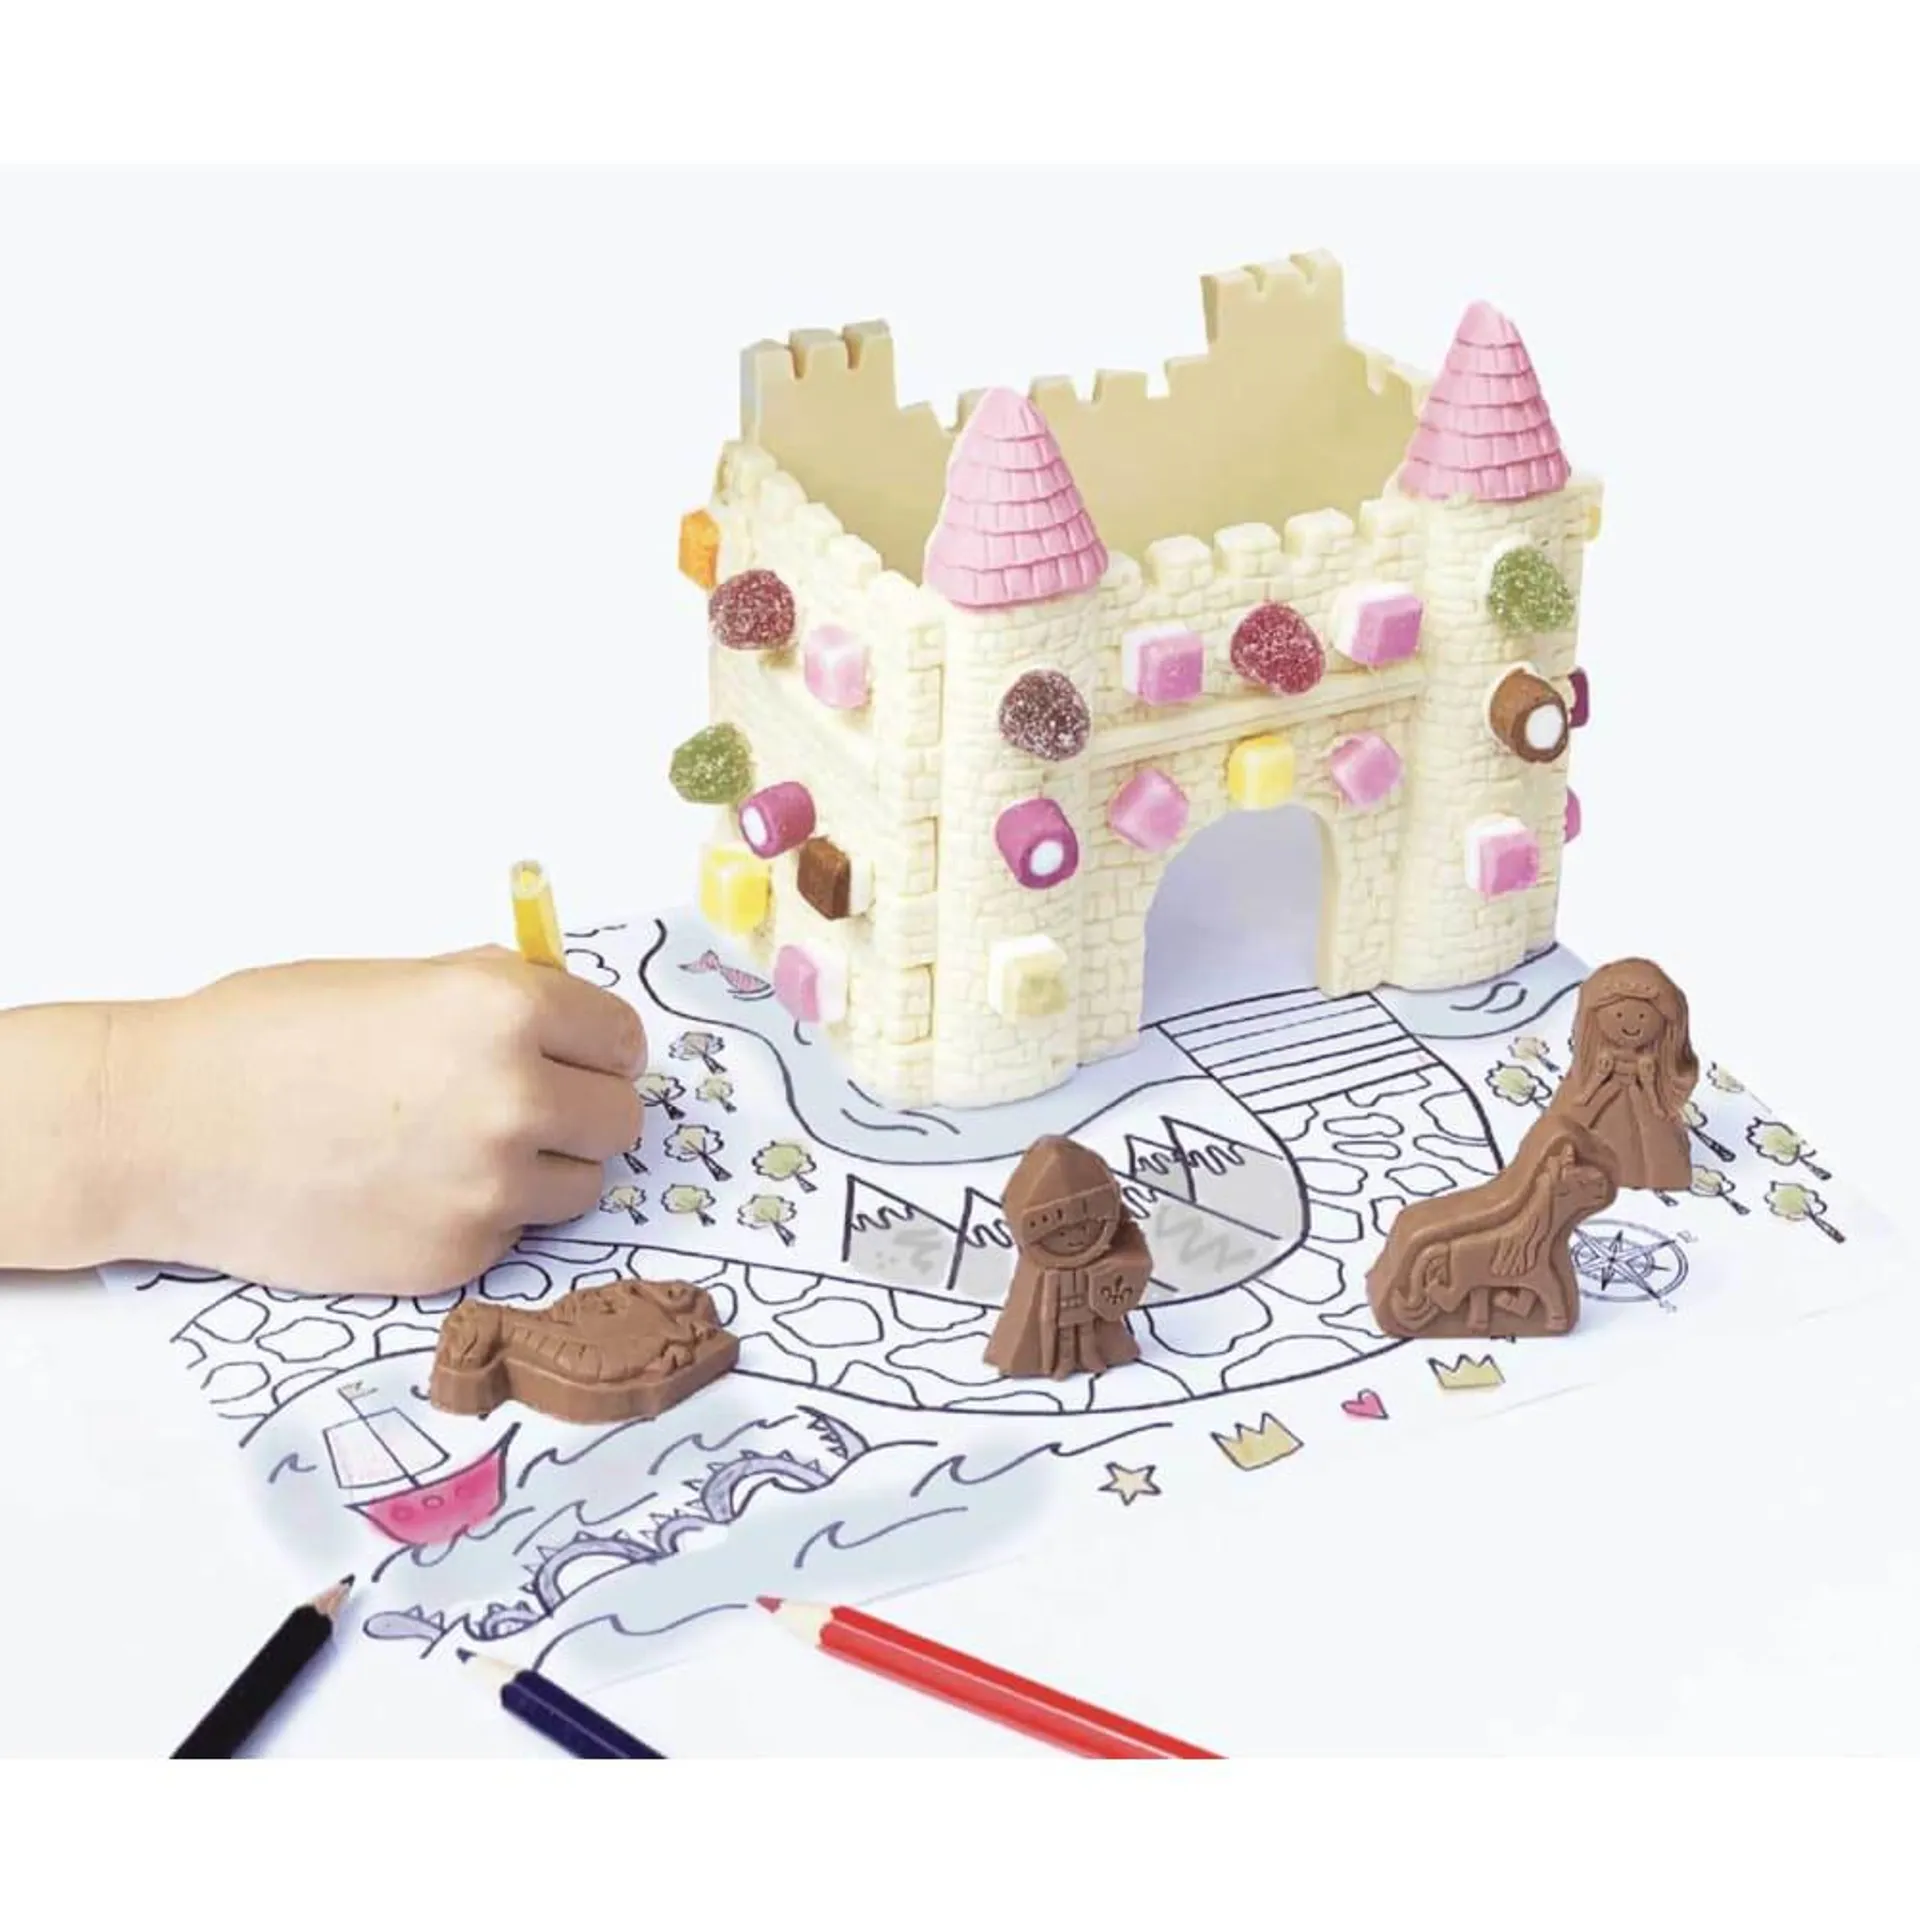 Decorate Your Own White Chocolate Castle